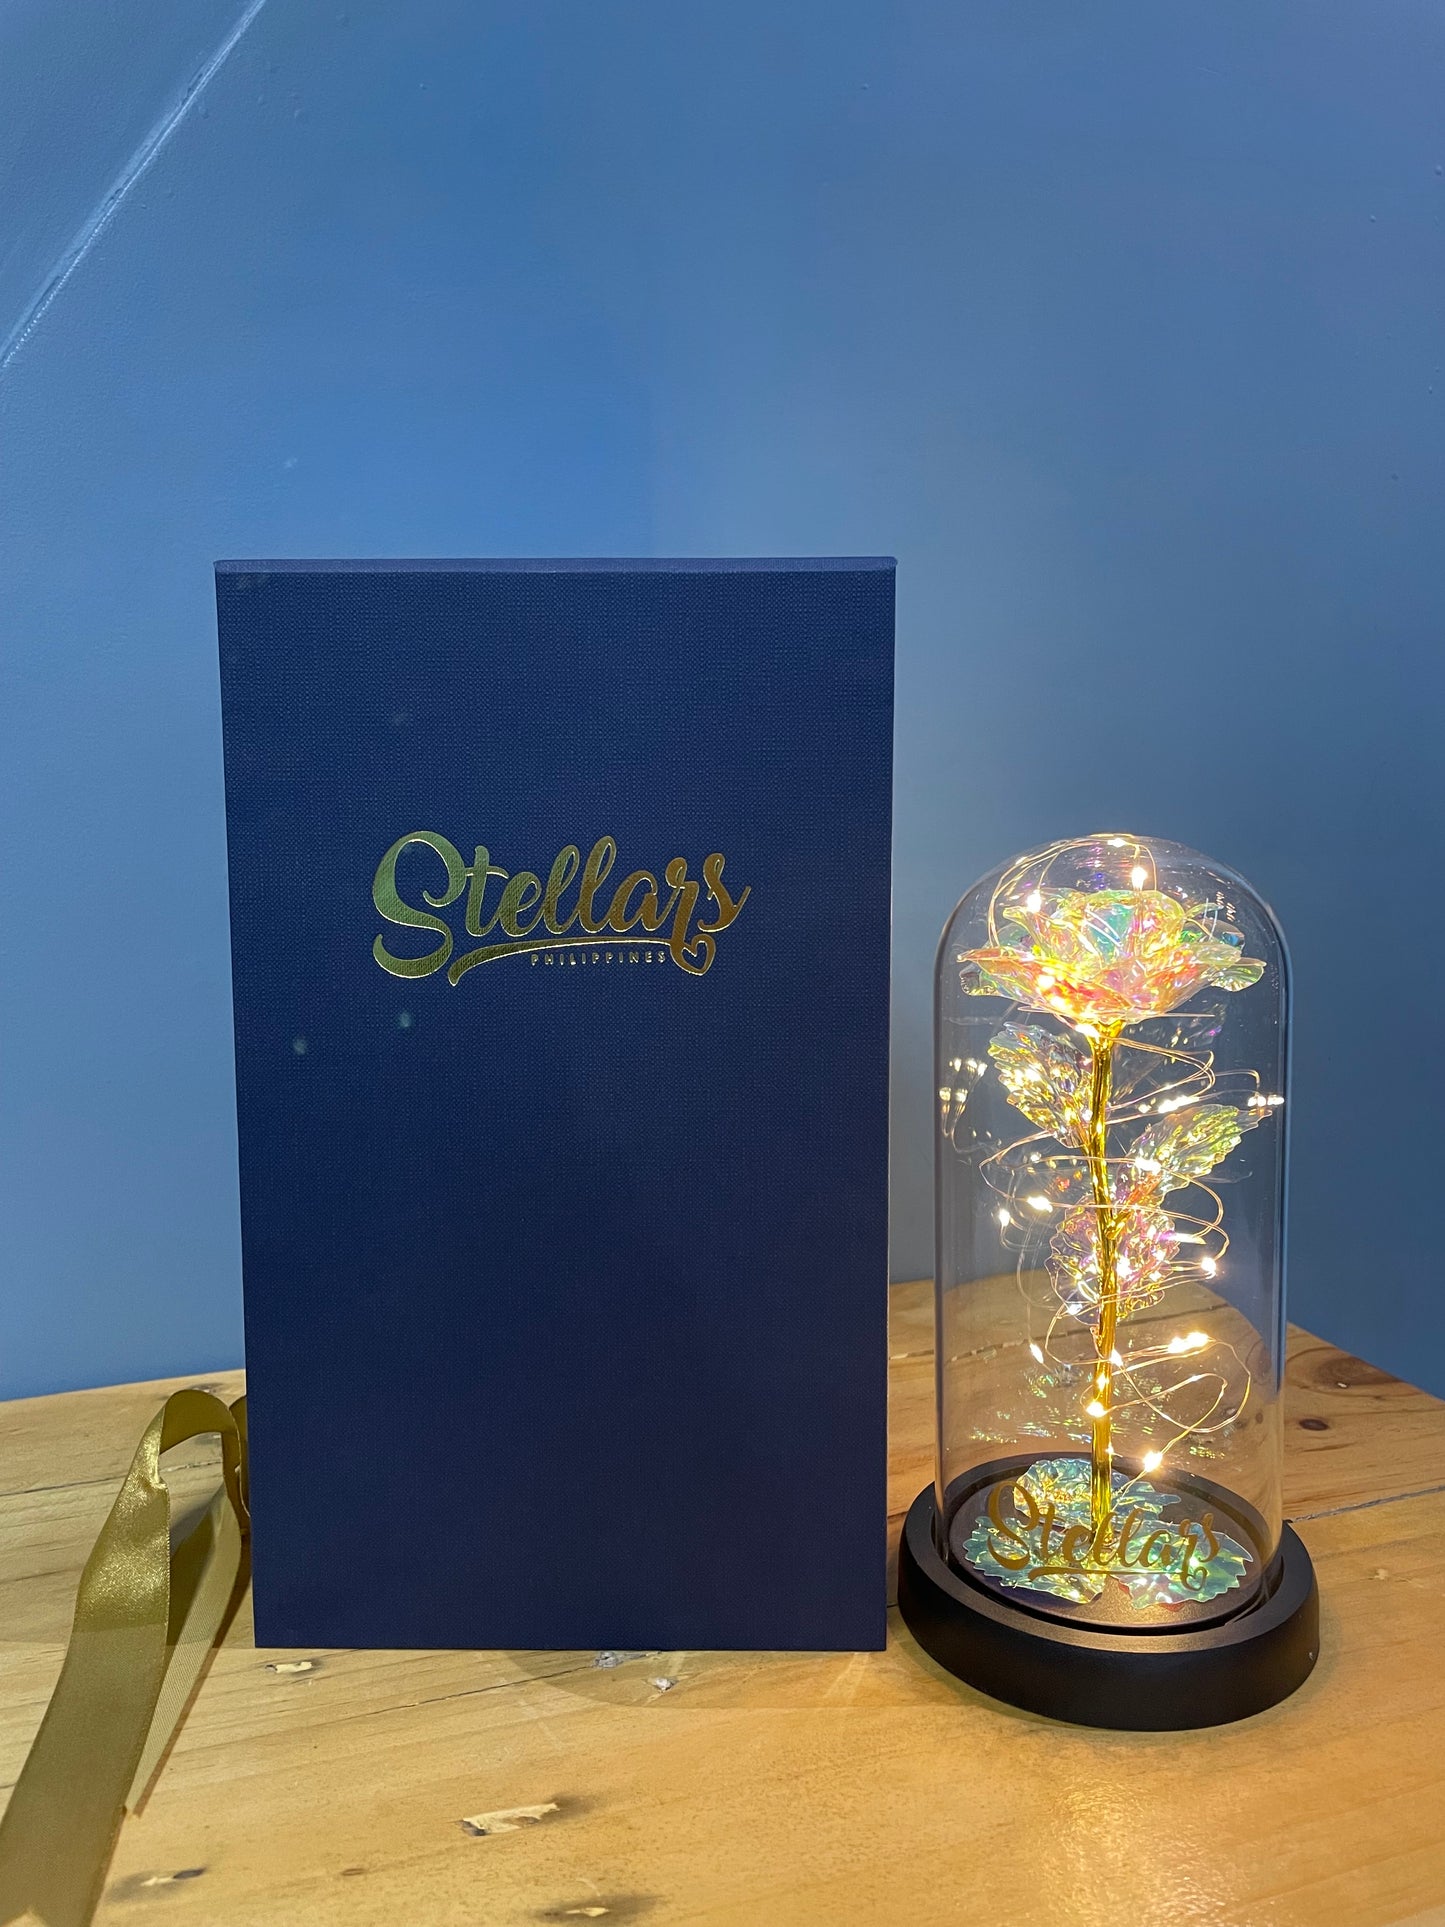 Beauty and the Beast with Stellar's Signature Rose in Glass Dome